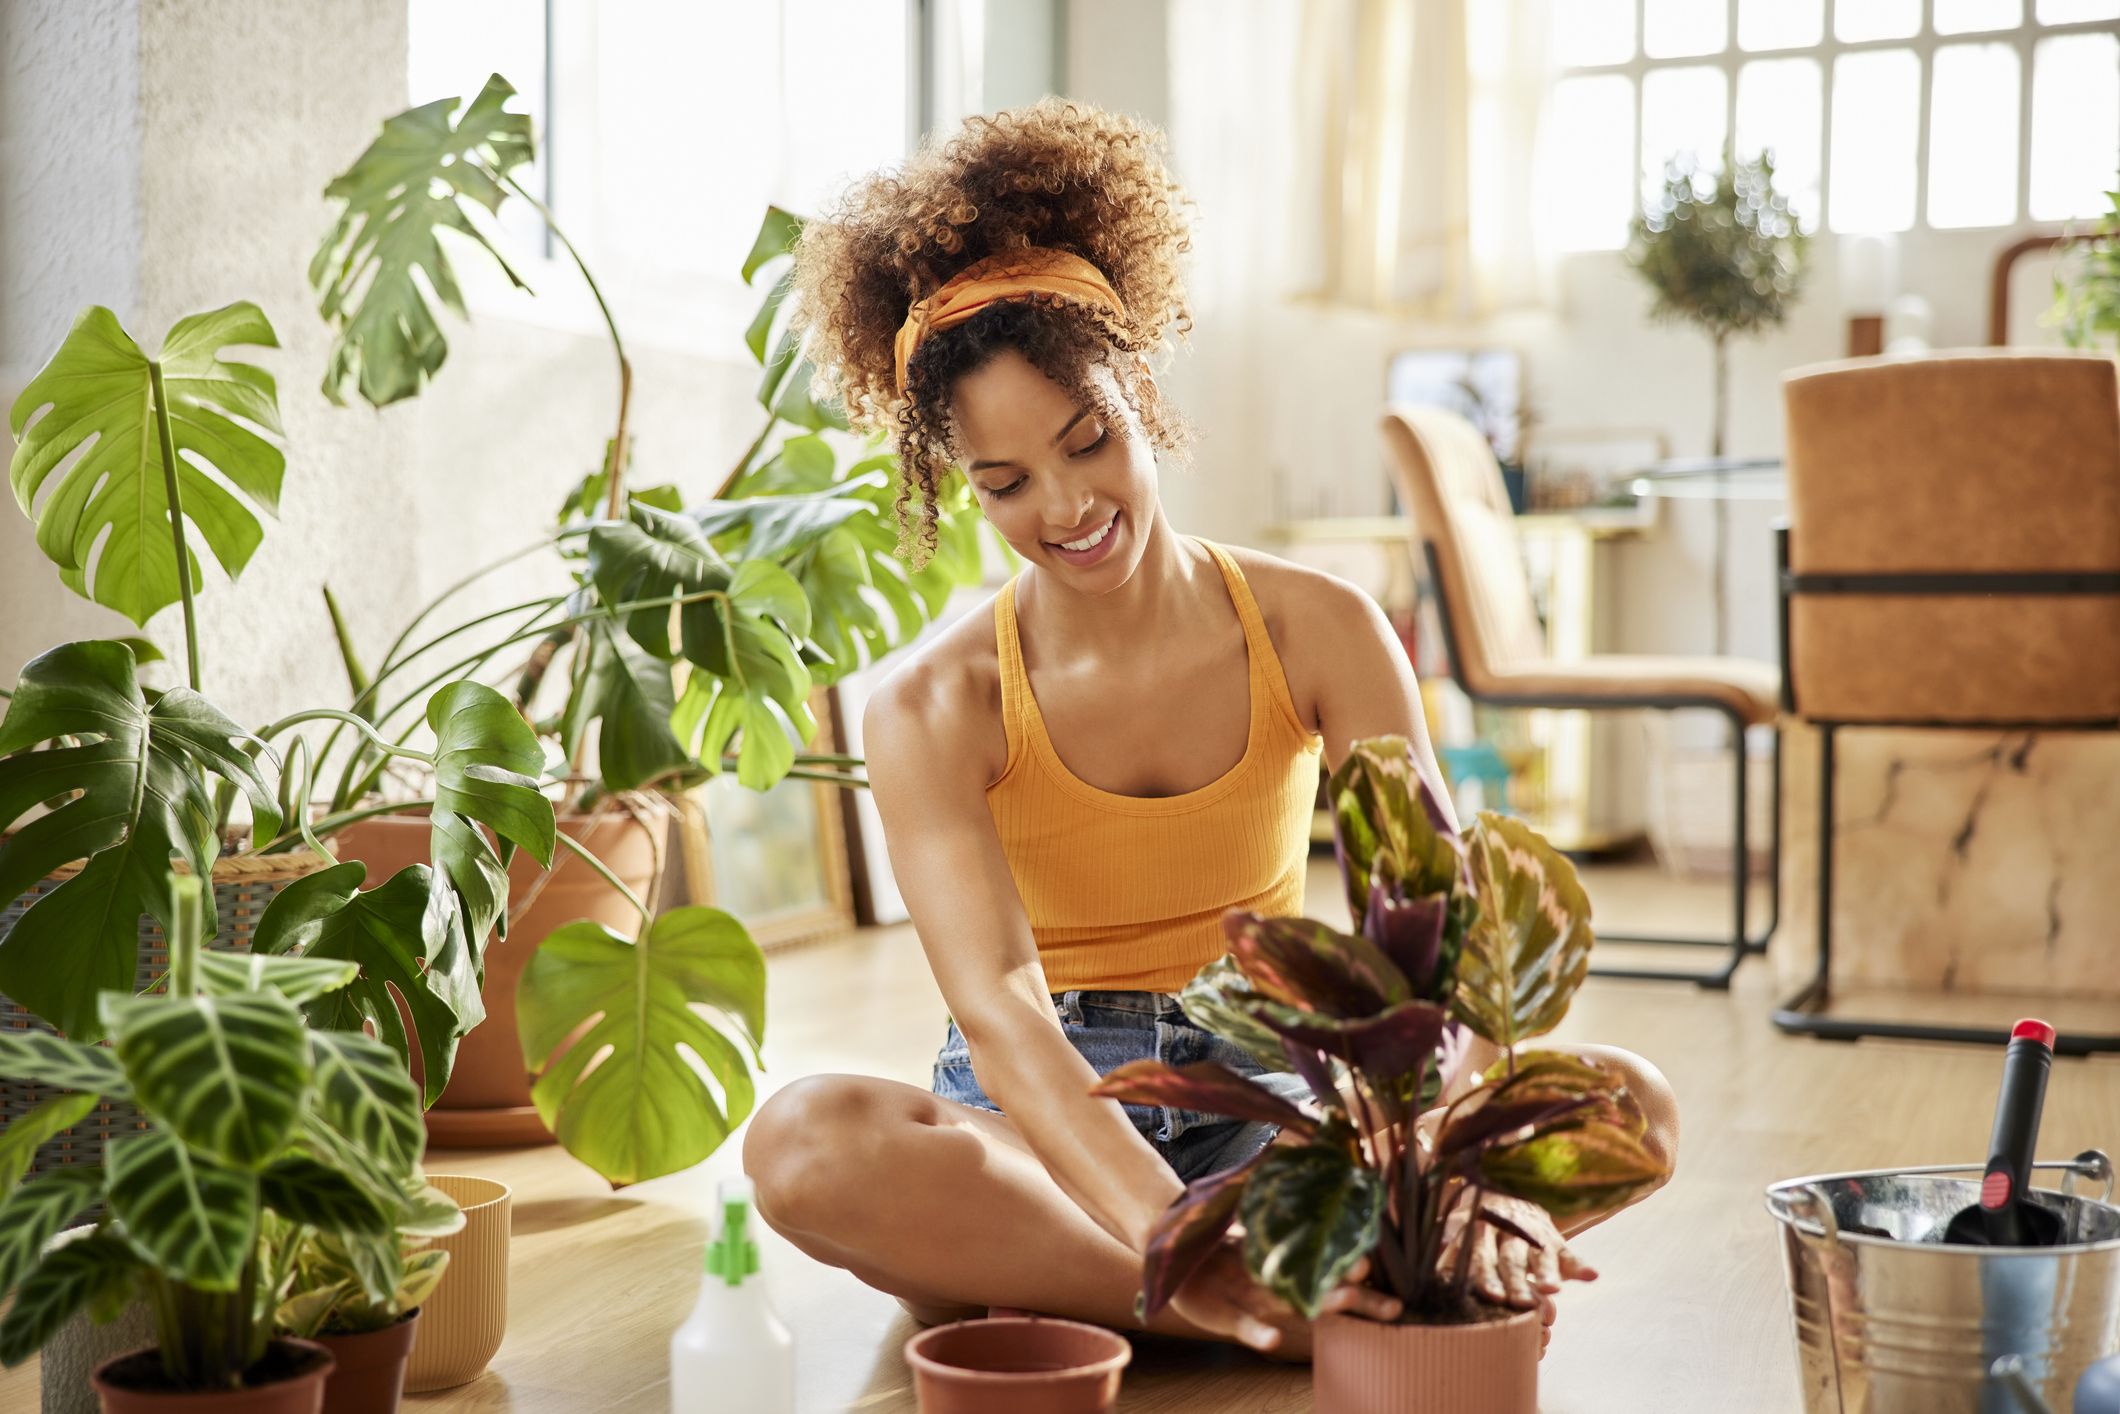 5 Reasons Why Not To Buy Plants From Home Depot » Simplify Plants